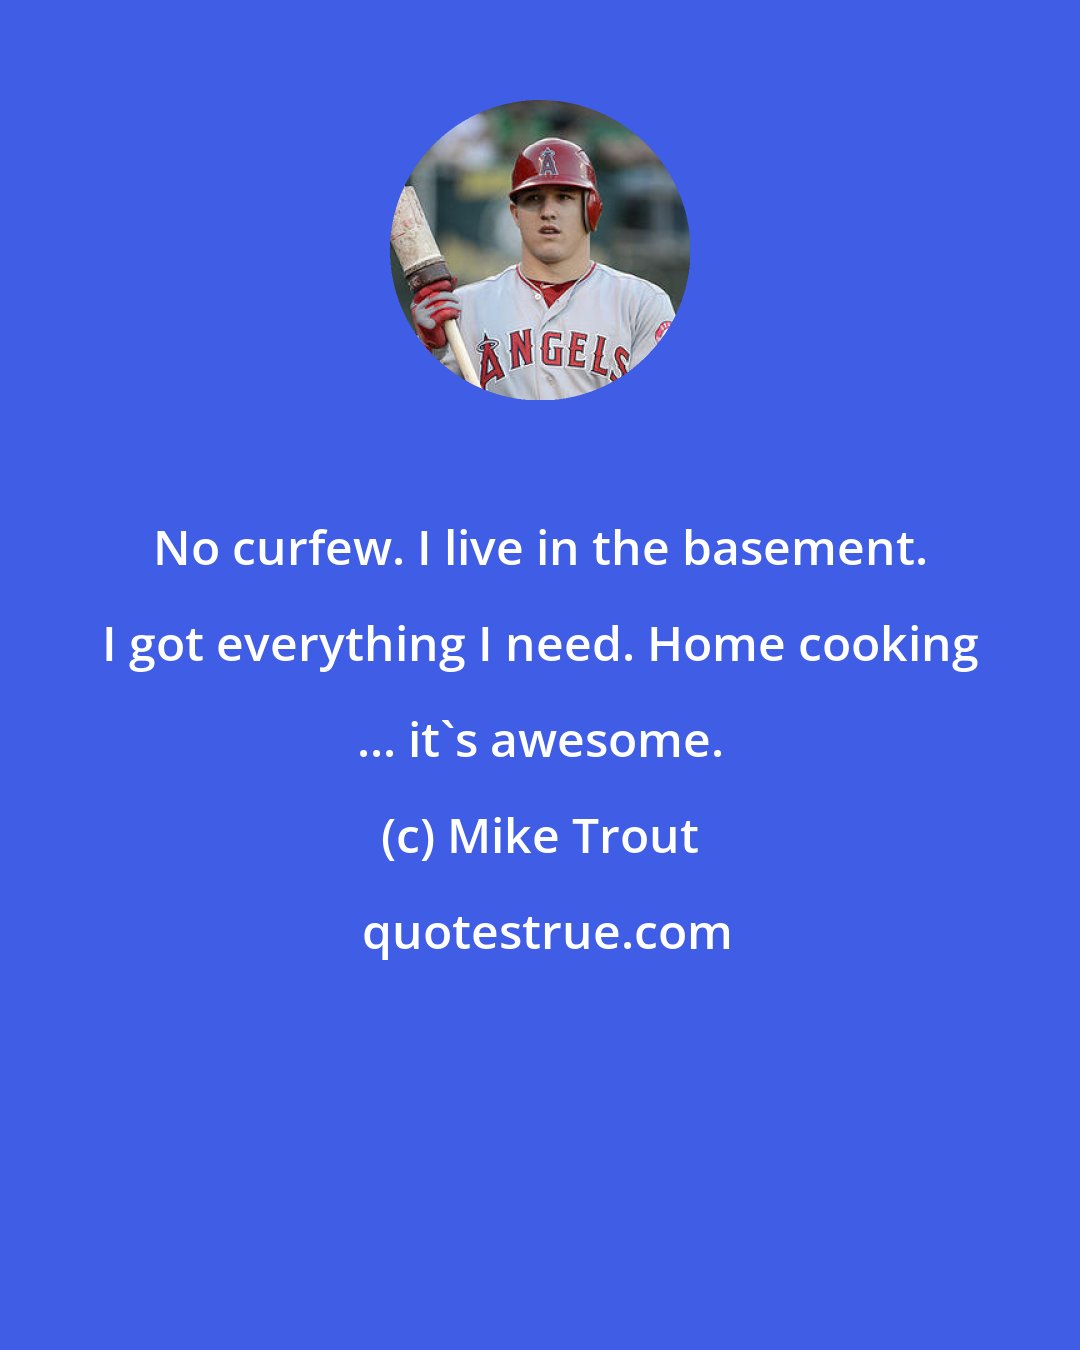 Mike Trout: No curfew. I live in the basement. I got everything I need. Home cooking ... it's awesome.